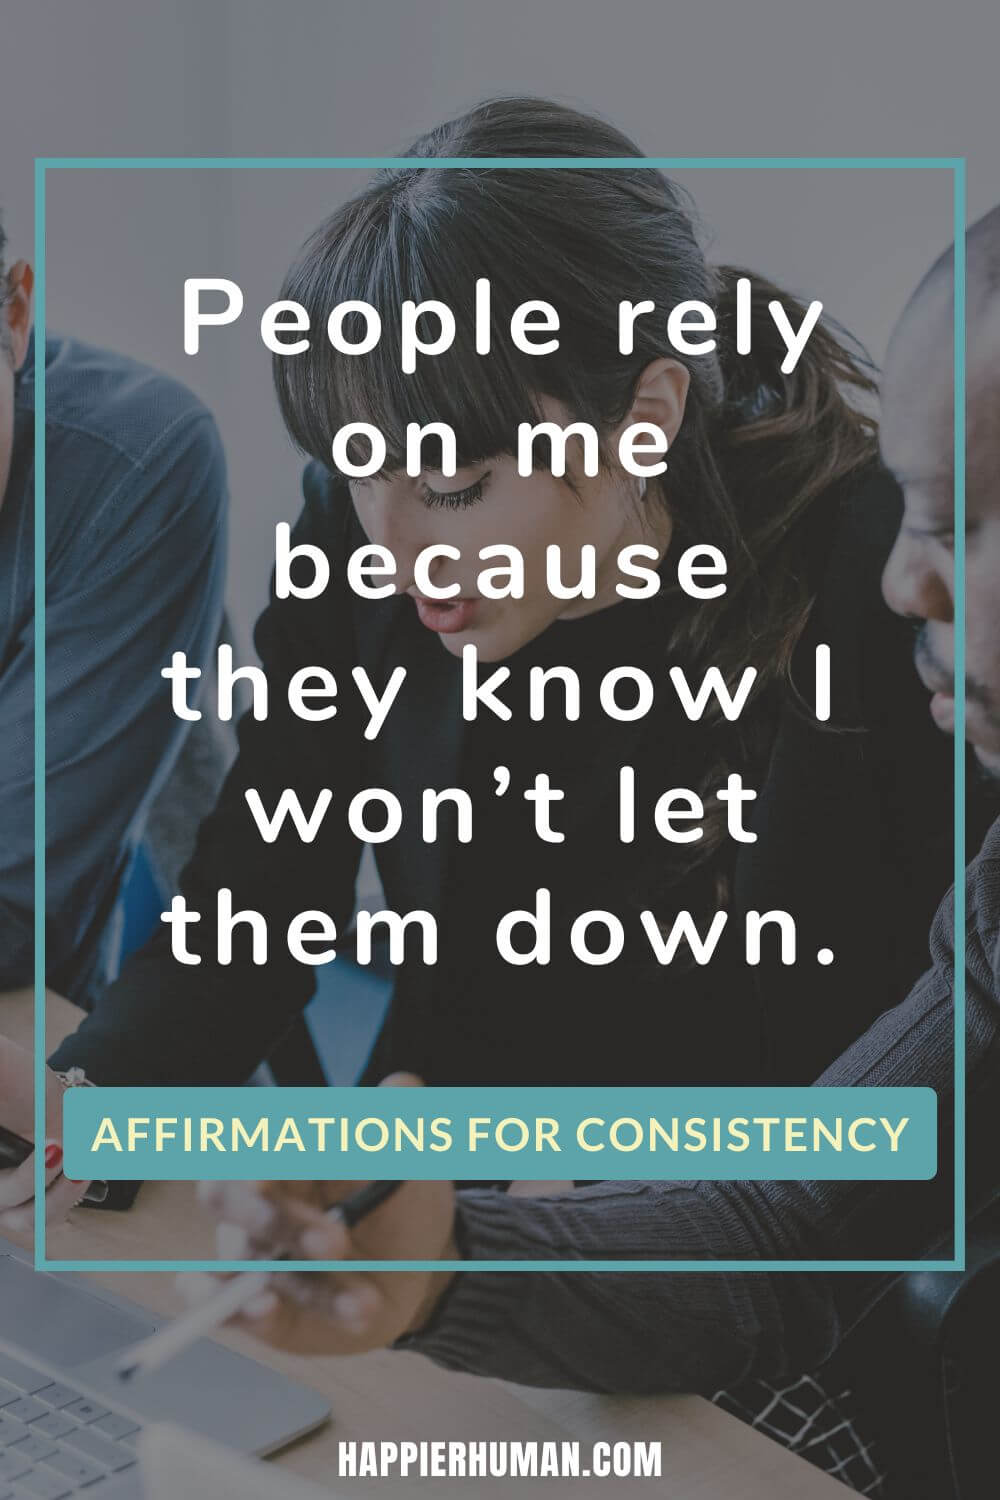 Affirmations for Consistency - People rely on me because they know I won’t let them down. | affirmations for willpower | affirmations for self confidence | impulse control affirmations